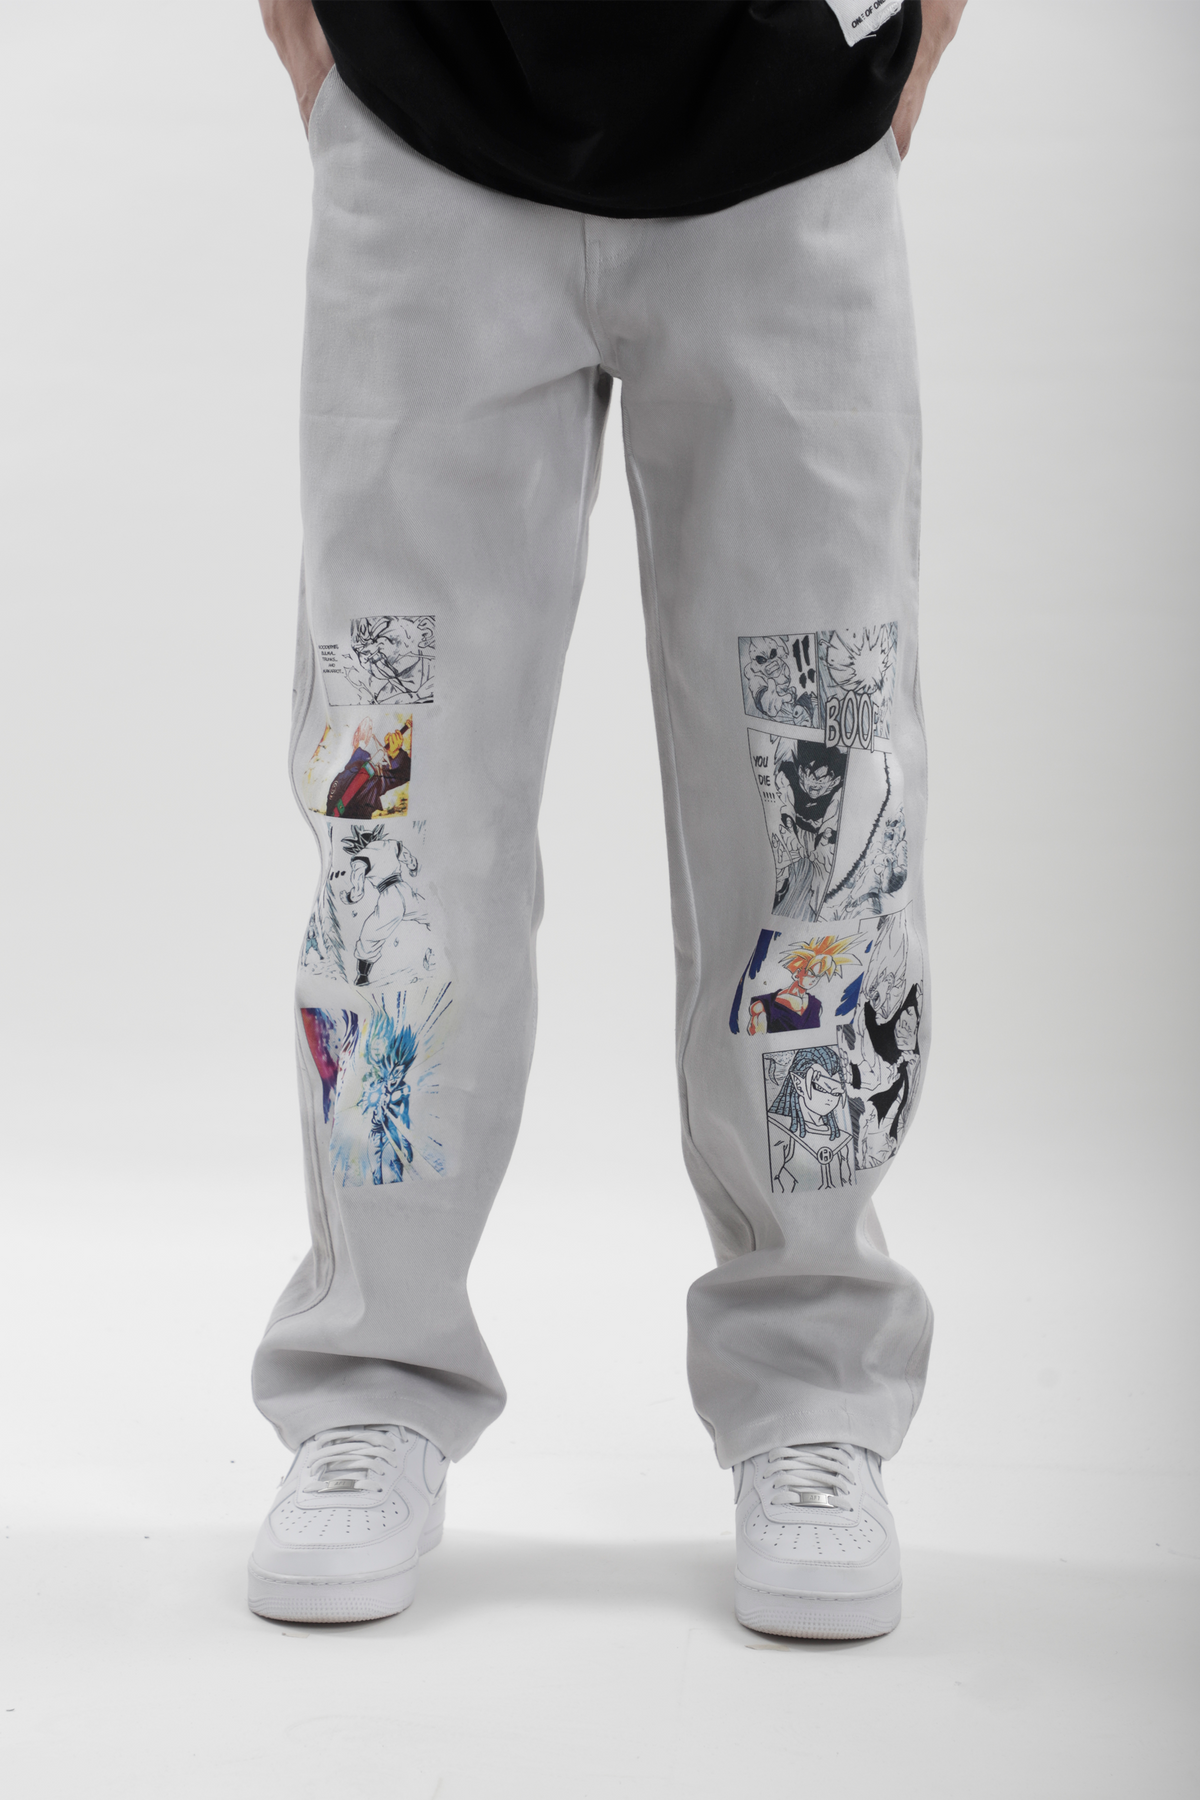 DBZ Denim Jeans, a product by TOFFLE